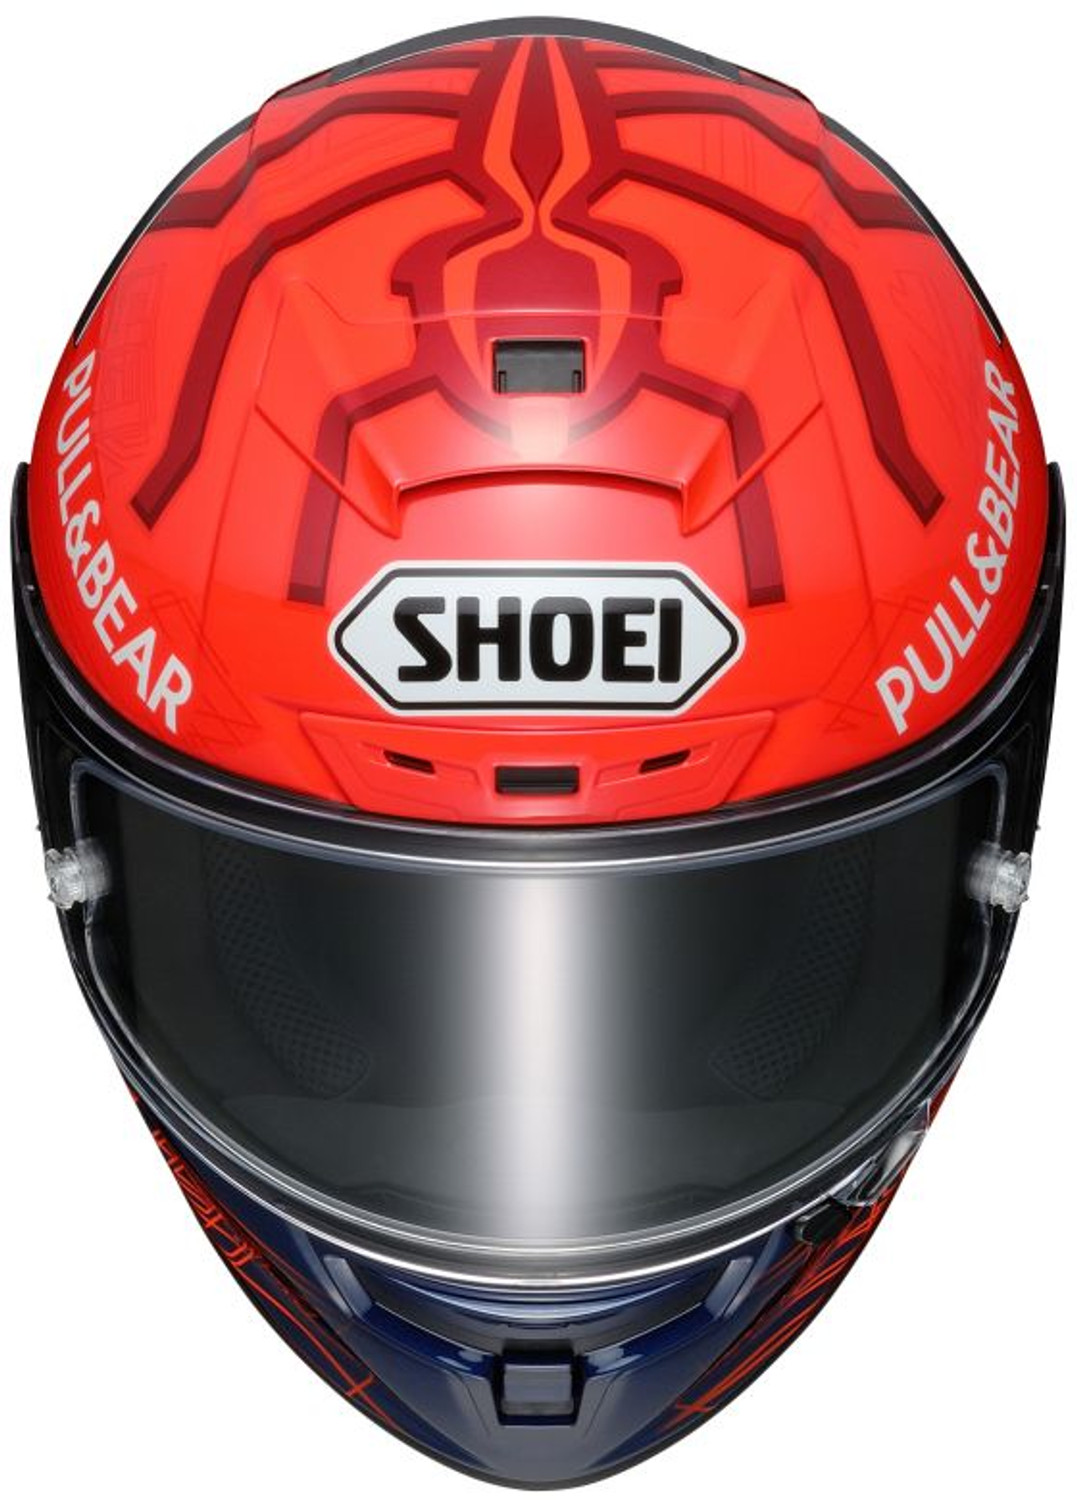 Shoei X-14 Helmet - Marquez 6 - Motorcycle Closeouts by Rider 